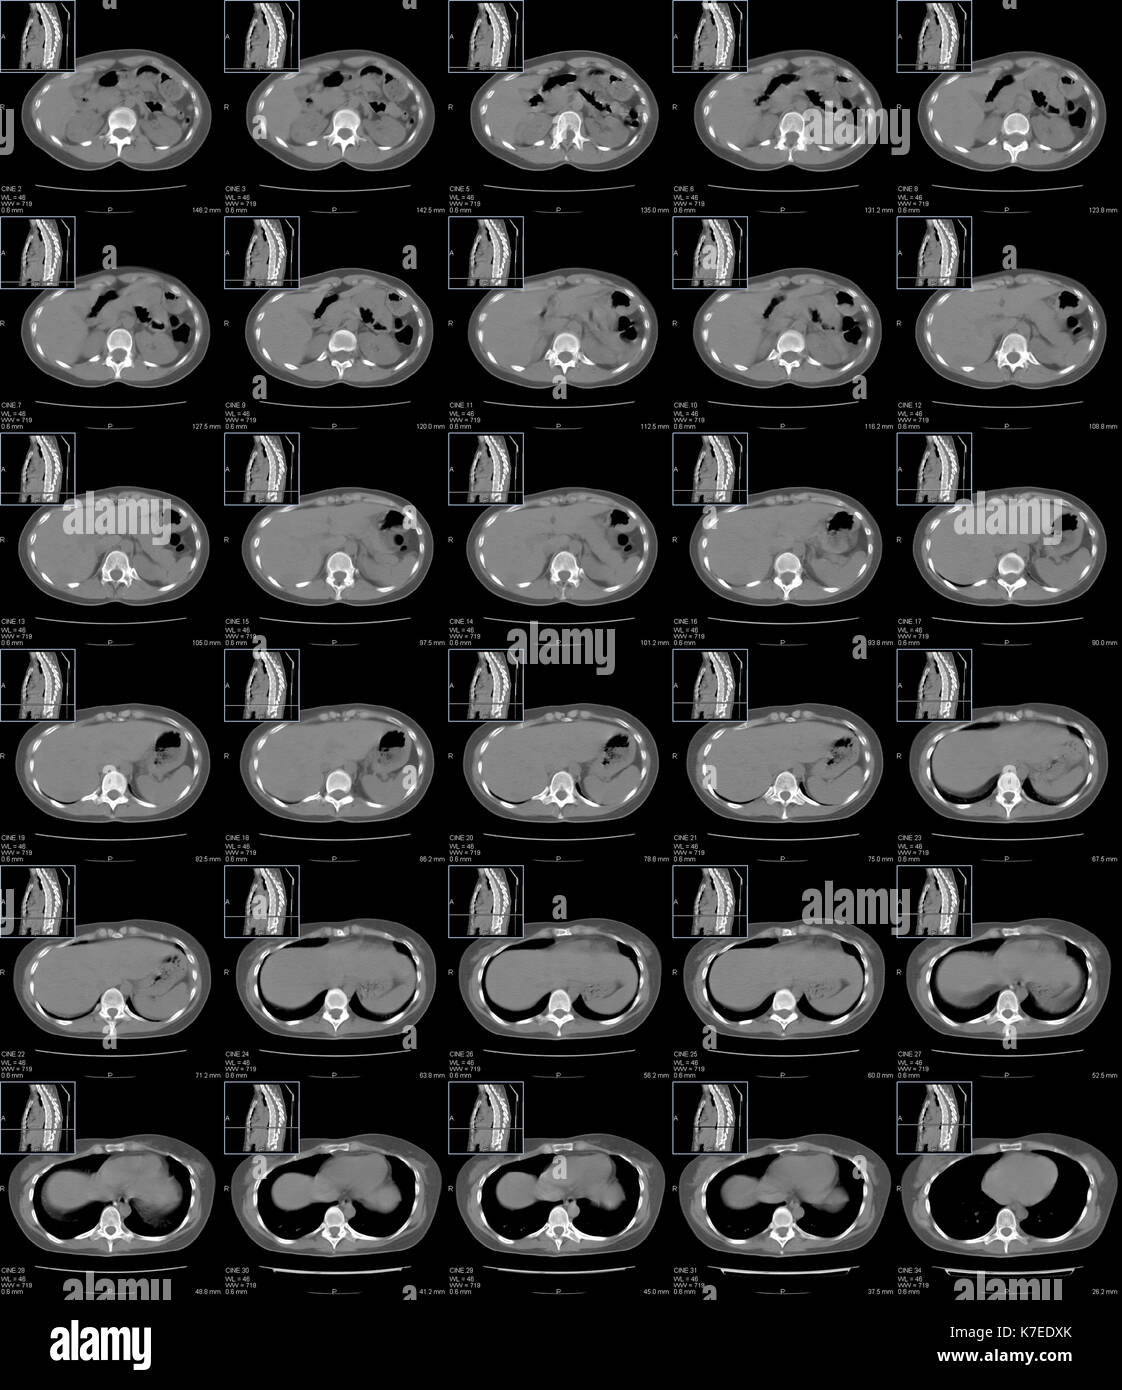 Abdomen and chest anatomy. Series of computer tomography (CT) scans of transverse sections through the upper part of the abdomen and the lower part of chest of a 30 year old patient. They show the liver (left), bowels (right), spine (bottom), kidneys (bottom left and right), heart (top in last line of images) and lower lobes of lungs (black in last line of images). Stock Photo